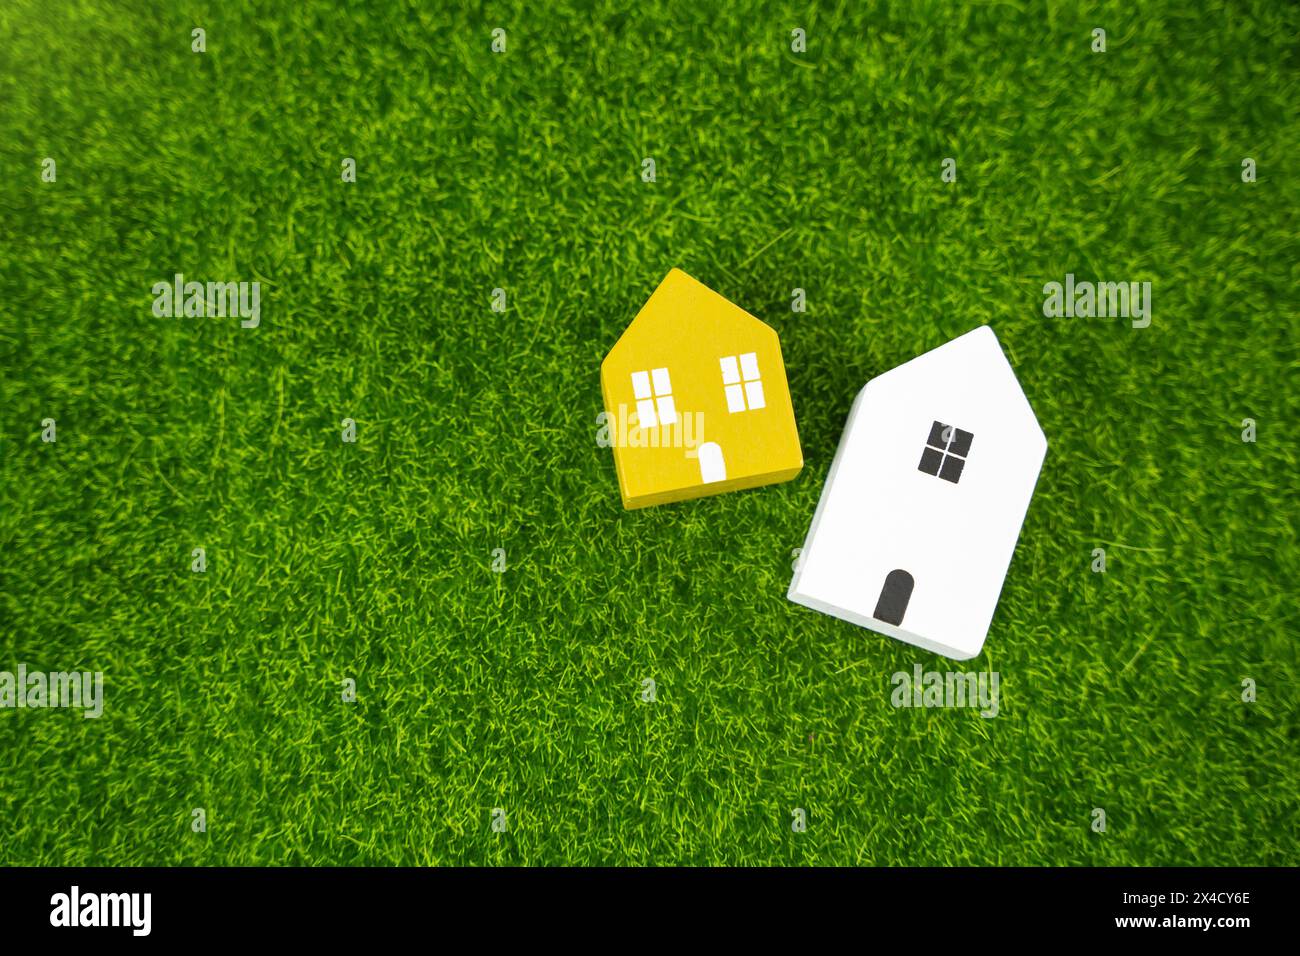 Two houses on the grass. Environmental friendliness and autonomy of housing. High energy saving technologies, in harmony with nature. Spring and summe Stock Photo